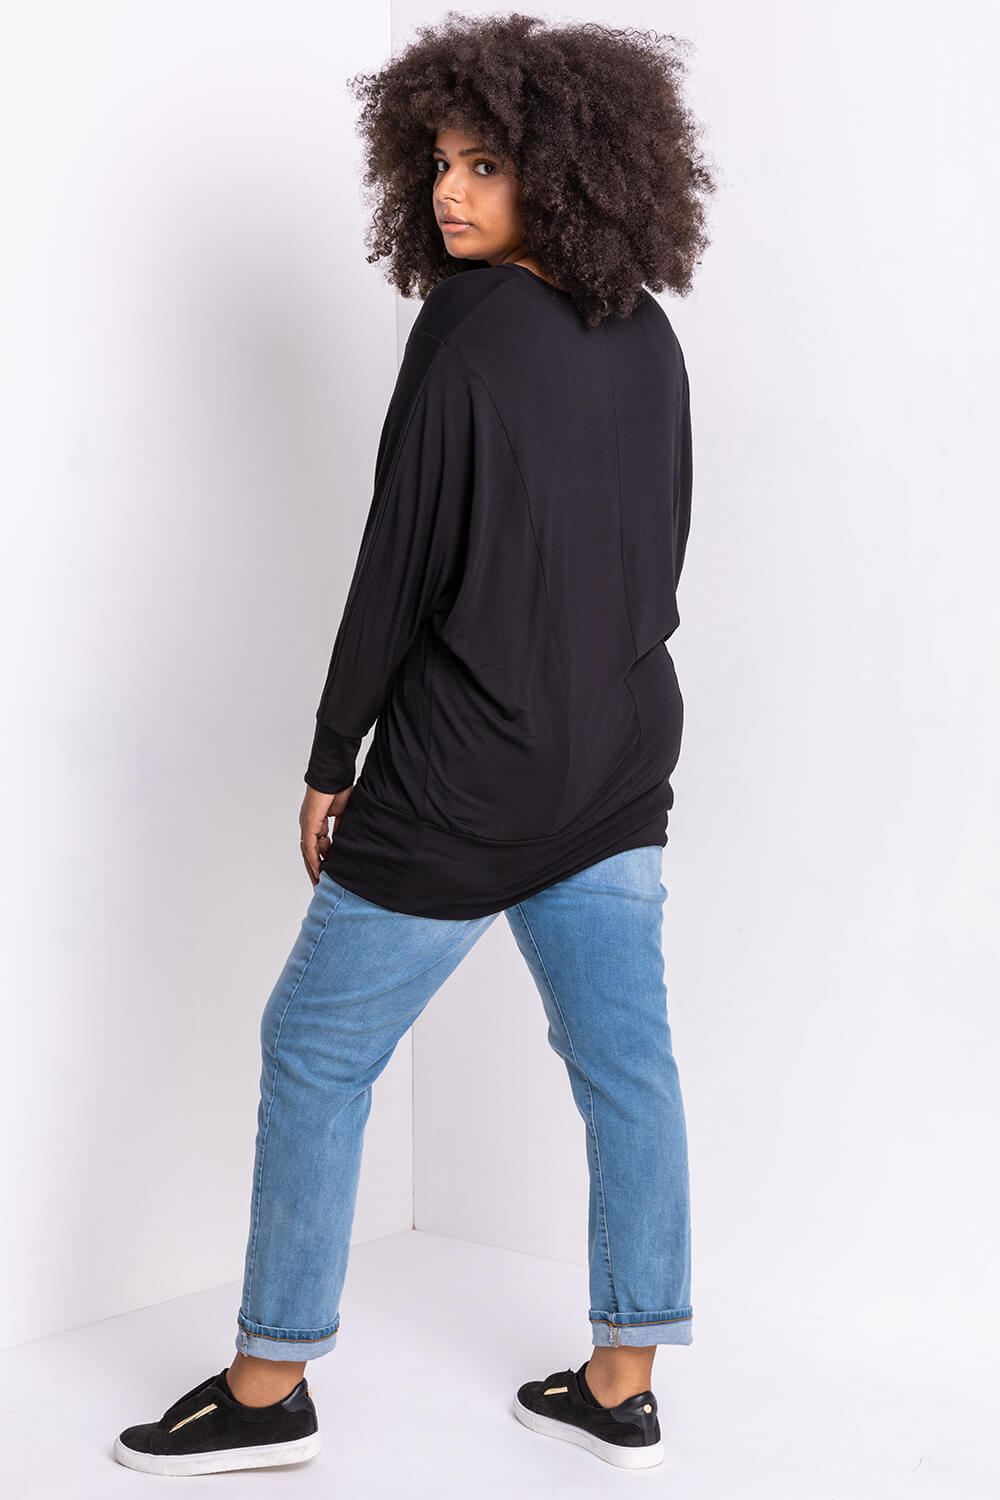 Black Curve Crew Neck Long Sleeve Top, Image 2 of 4